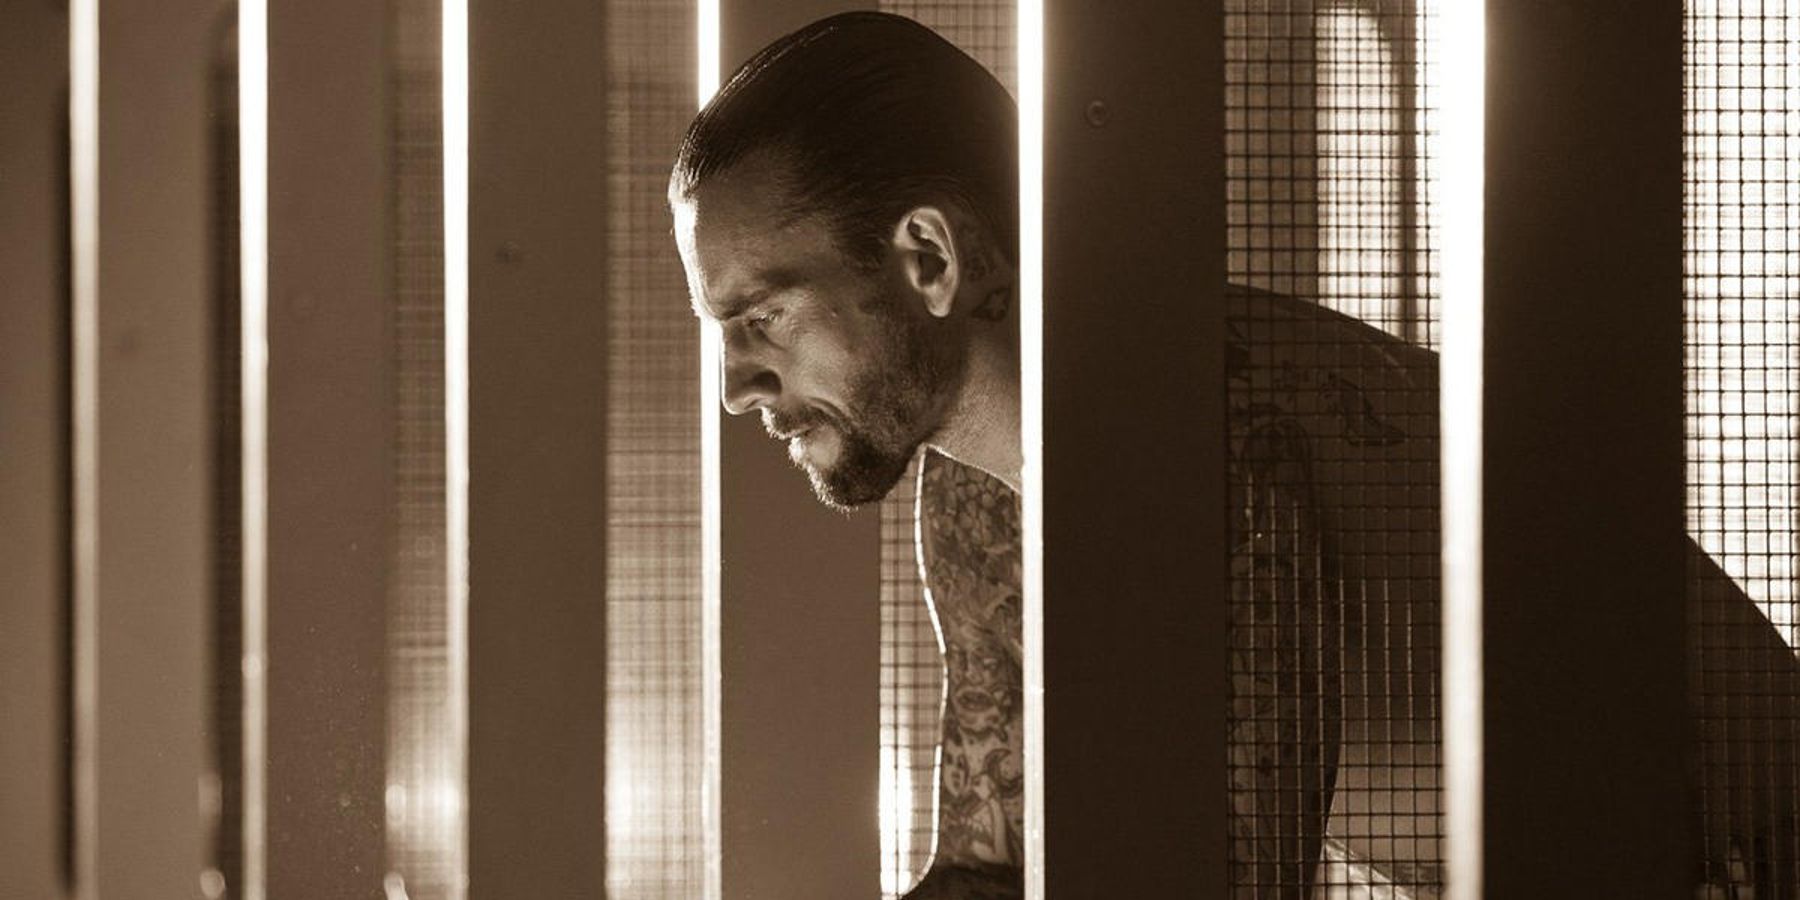 CM Punk prepares for a match during WWE WrestleMania weekend.